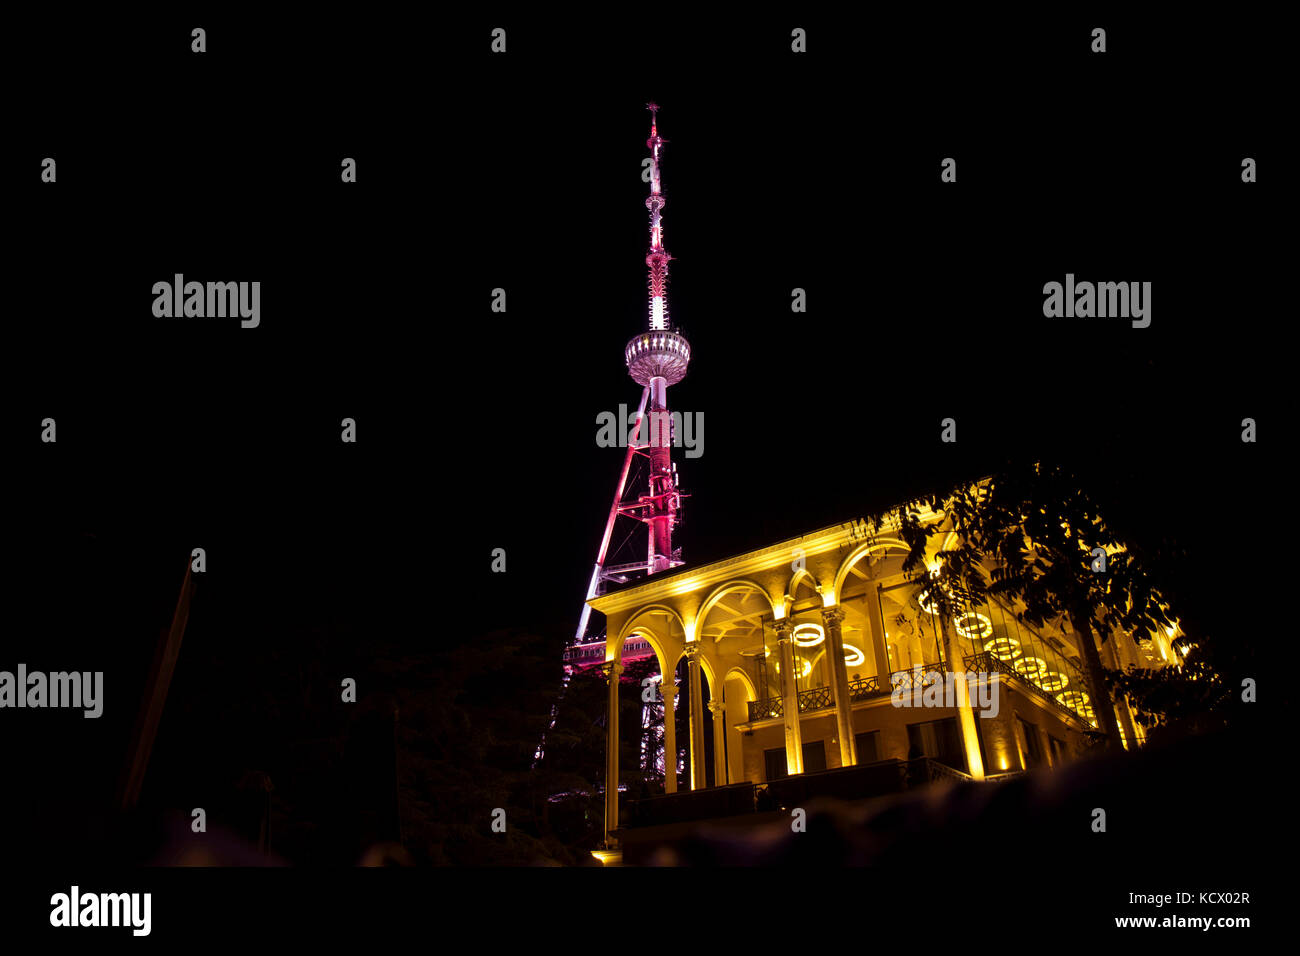 Tbilisi TV Broadcasting Tower at Night Stock Photo